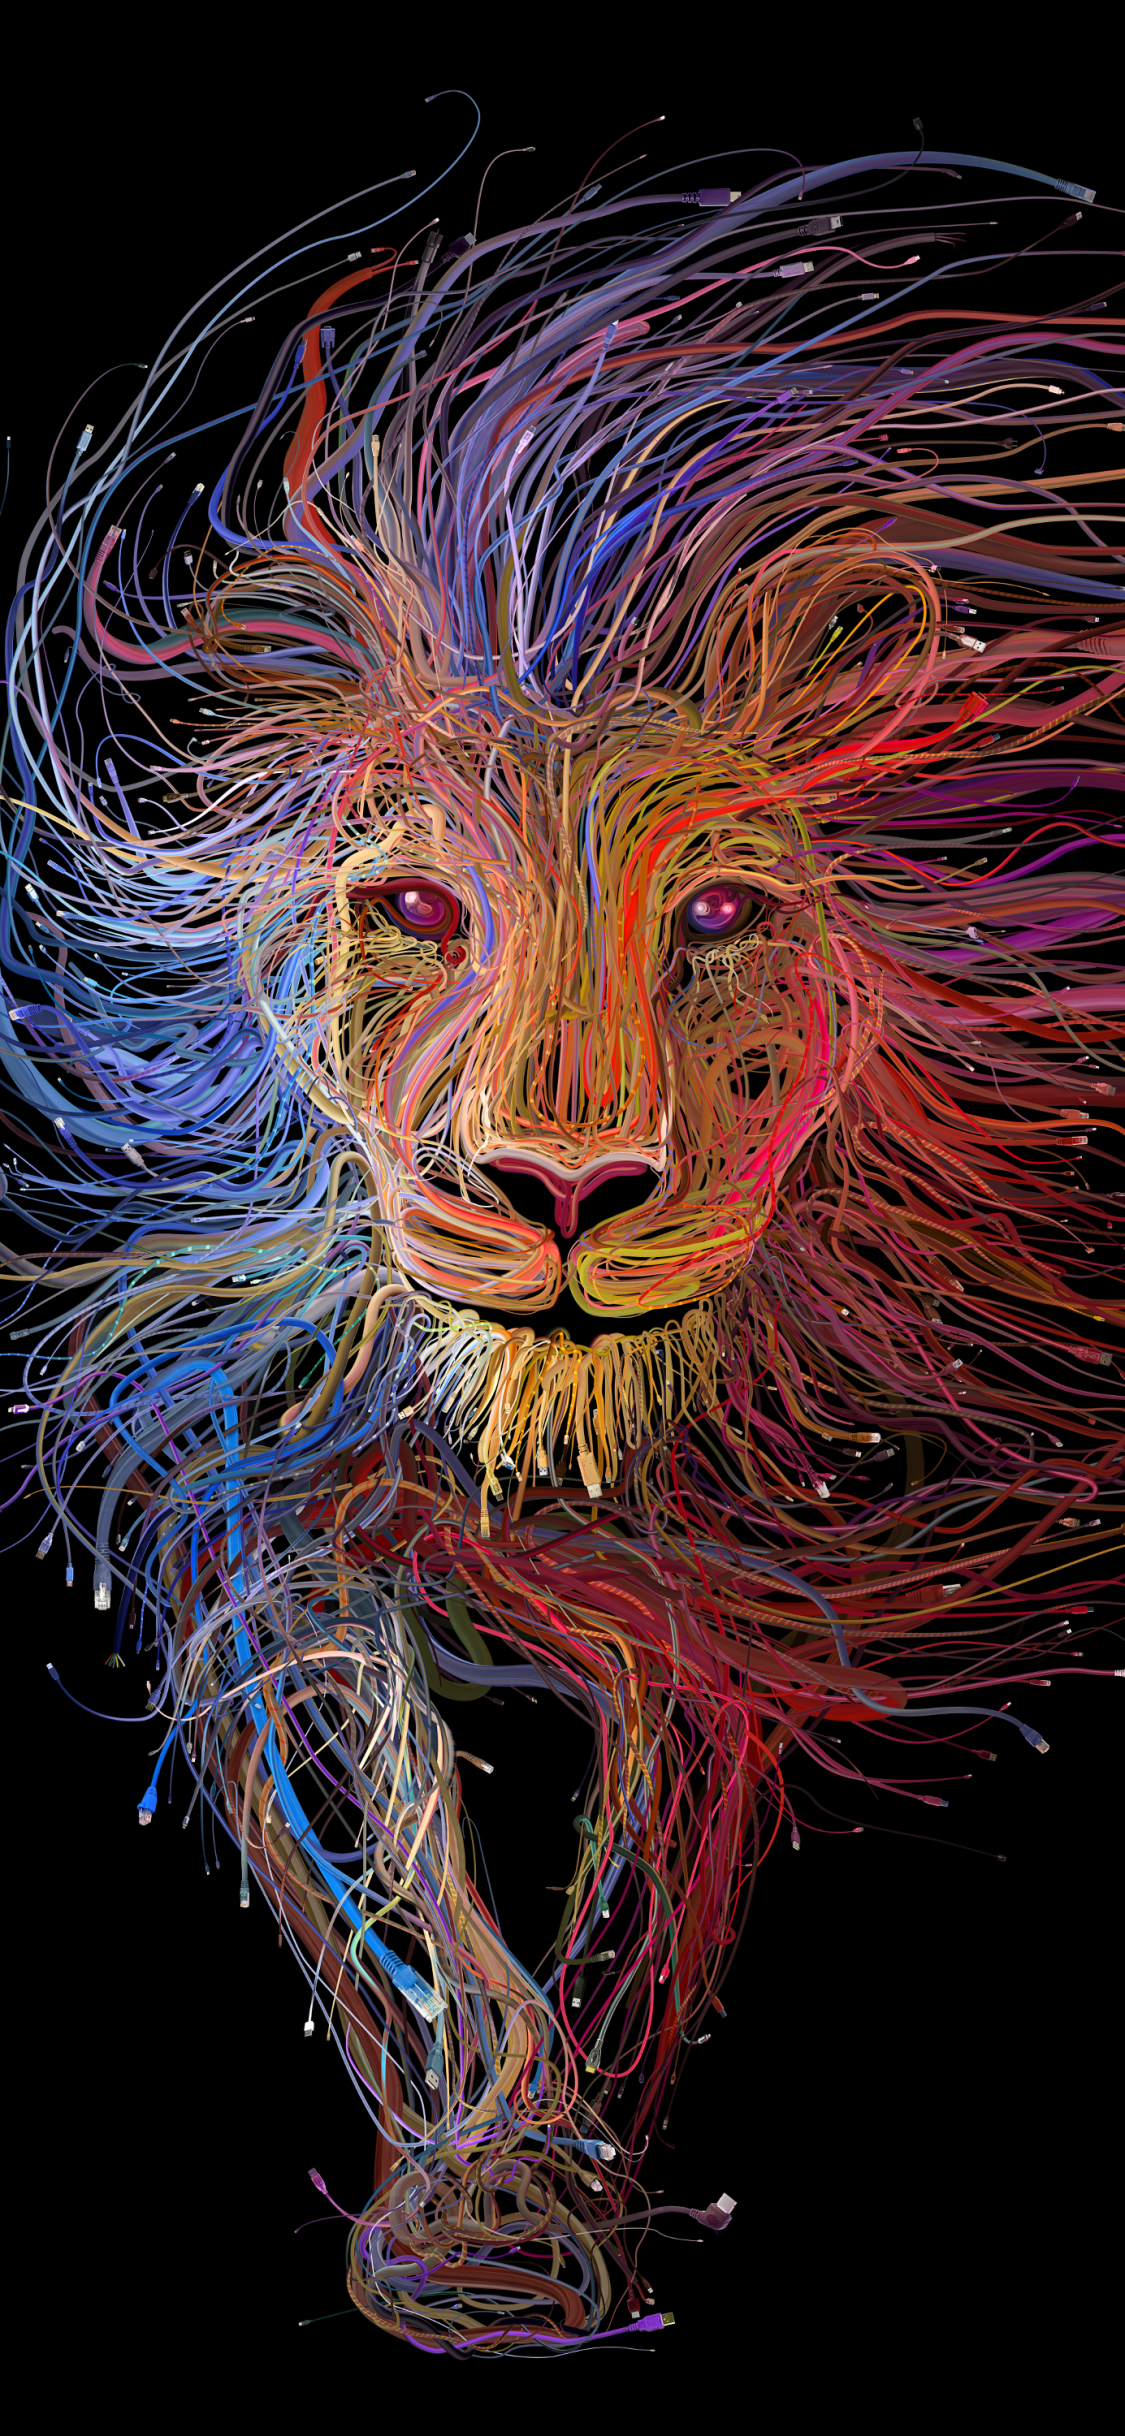 Lion art with cables wallpaper